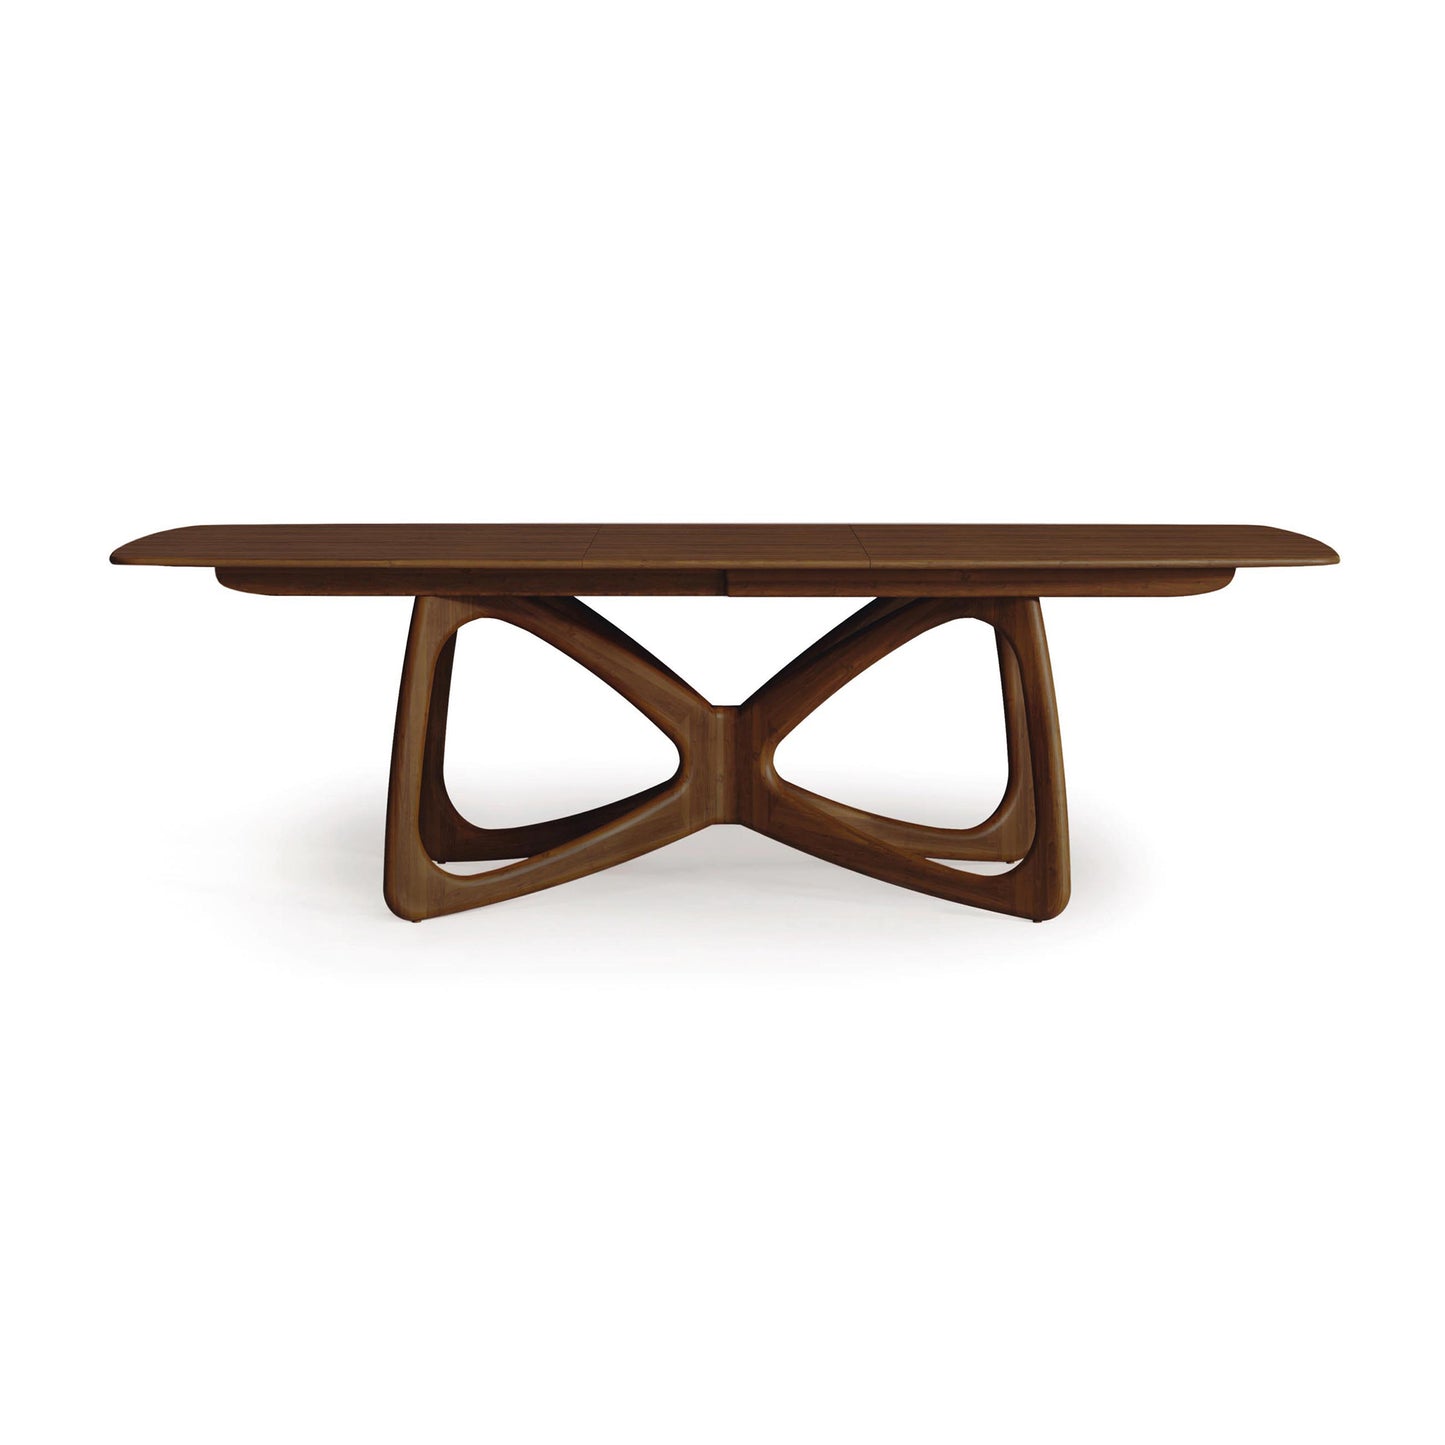 Alt text: Solid wood dining table from Copeland Furniture with modern design featuring a Butterfly Extension. The table has a rectangular top and unique intersecting curved supports forming an X-shaped base, made from sustainably sourced dark brown hardwoods. This American-made furniture piece represents high-quality craftsmanship in walnut wood.